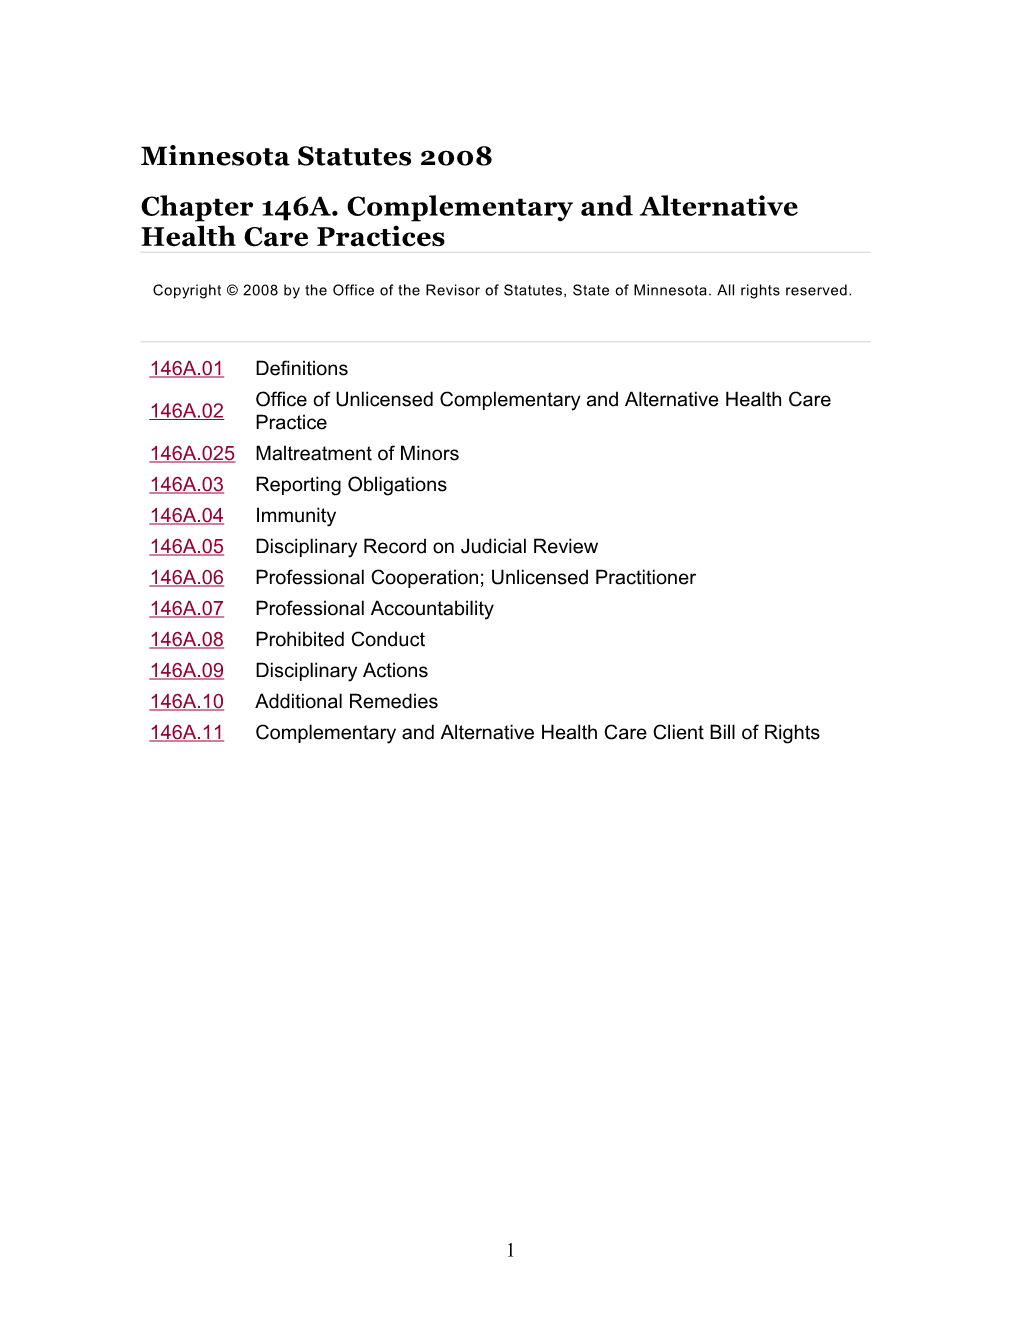 Chapter 146A. Complementary and Alternative Health Care Practices